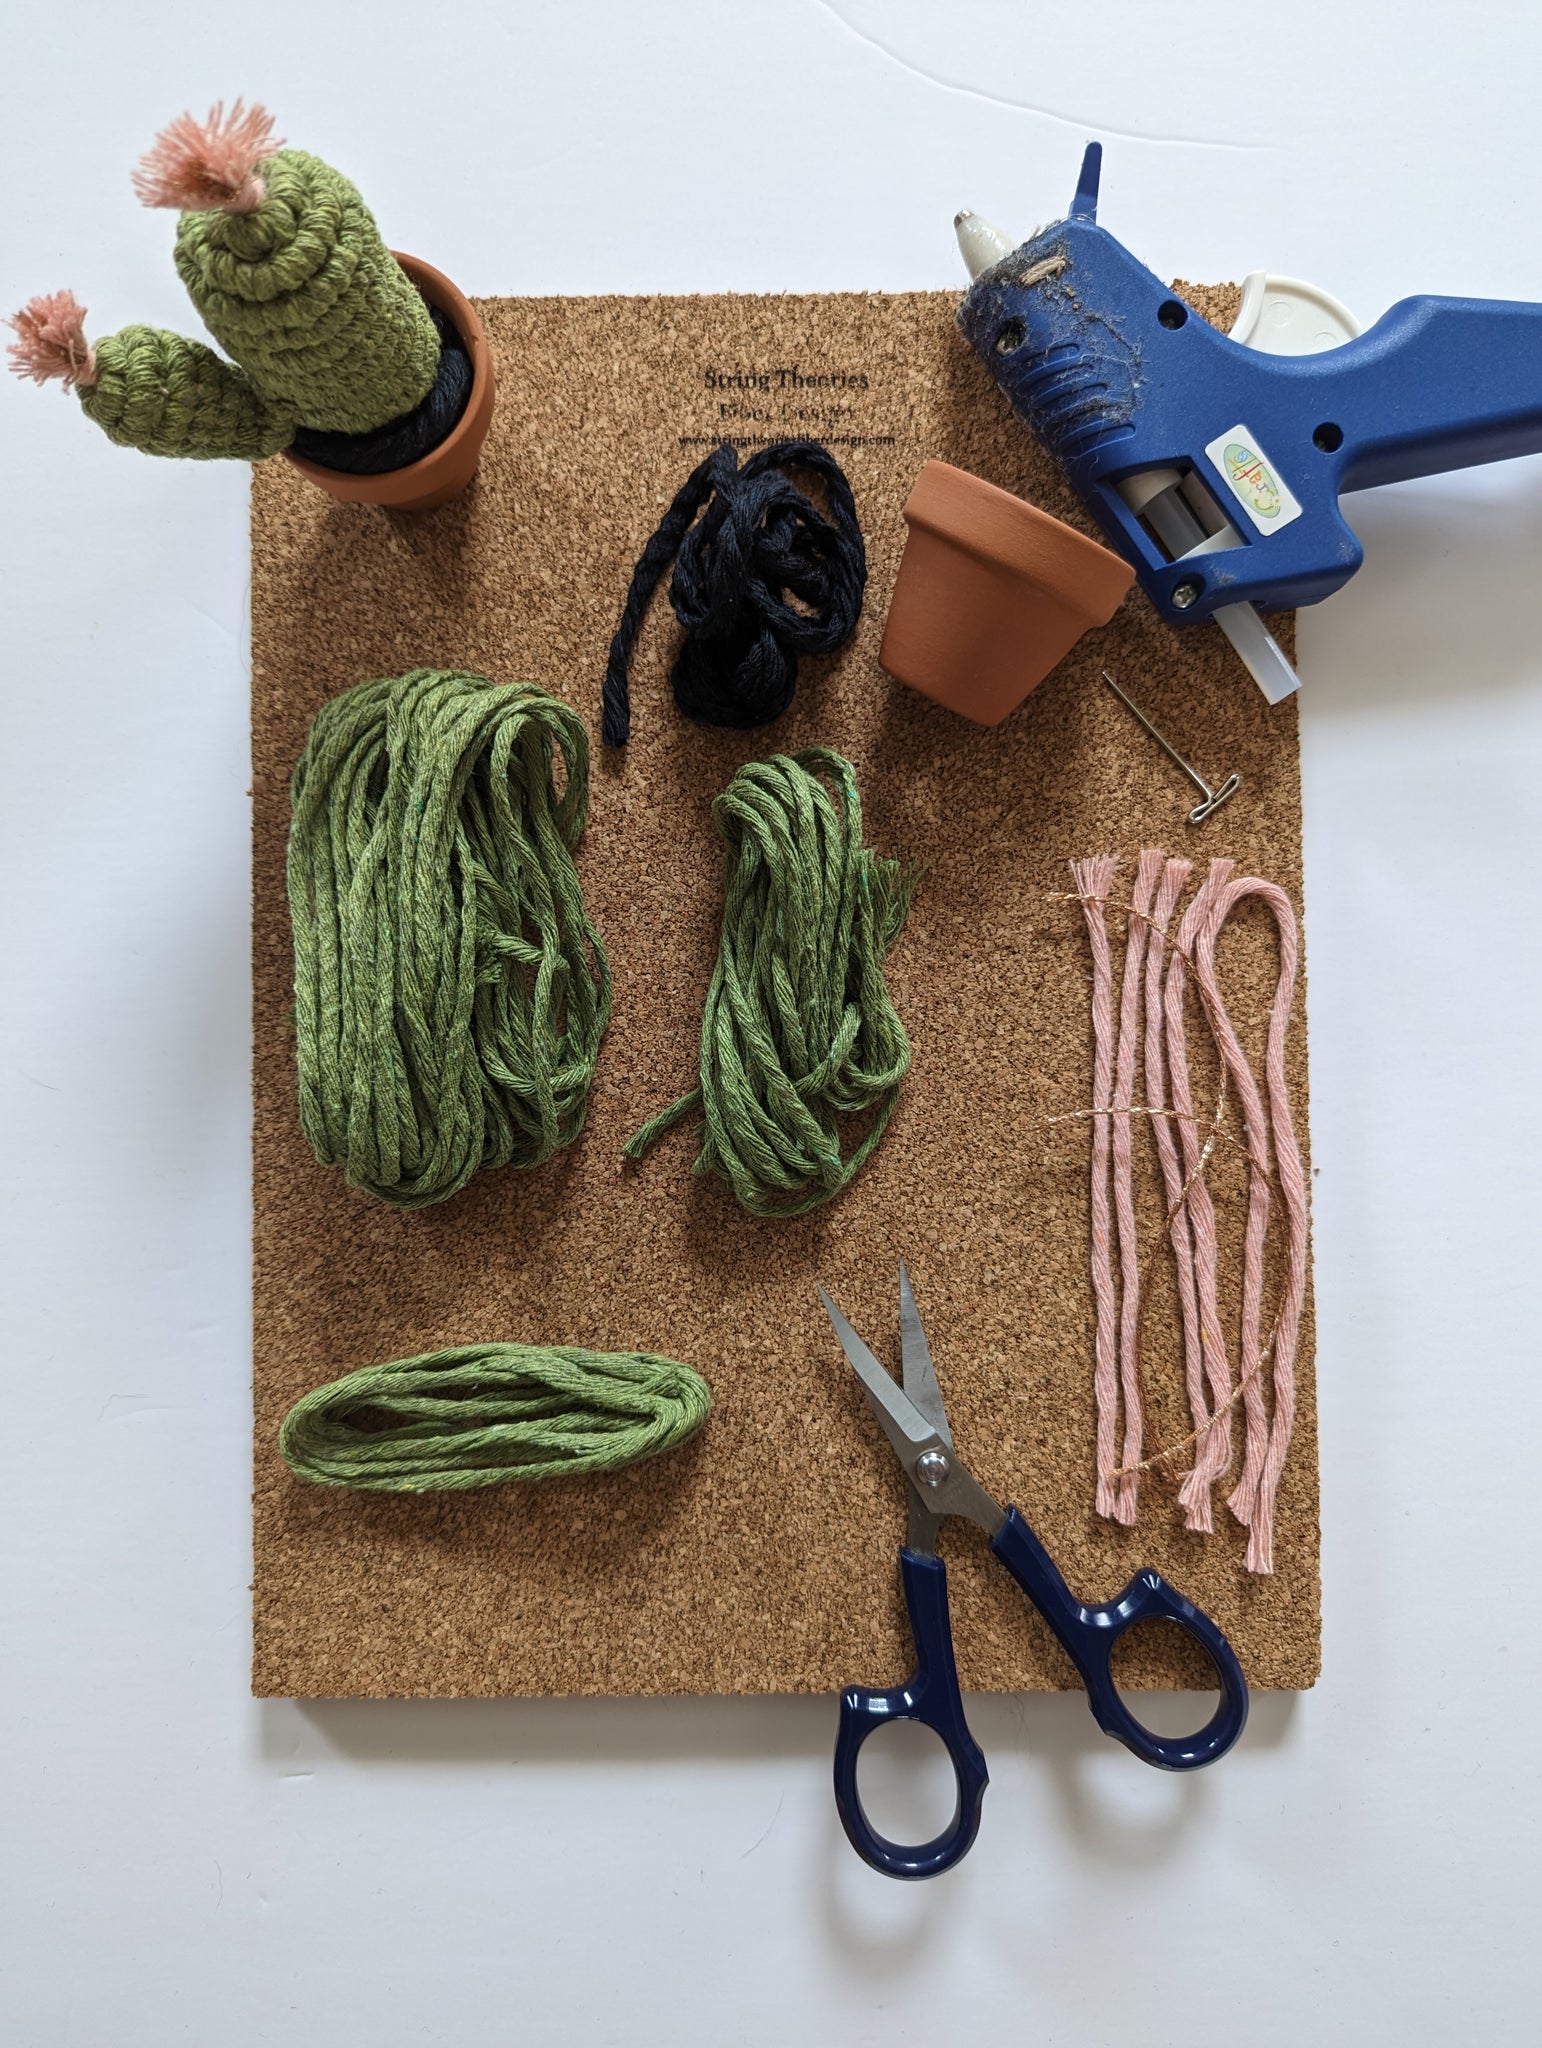 Cactus Craft Kit for Adults, Make Your Own Mini Macrame Cactus Craft Kit,  Birthday Gift, Crafty Friend Present, Unique Gift, Letterbox Gift 